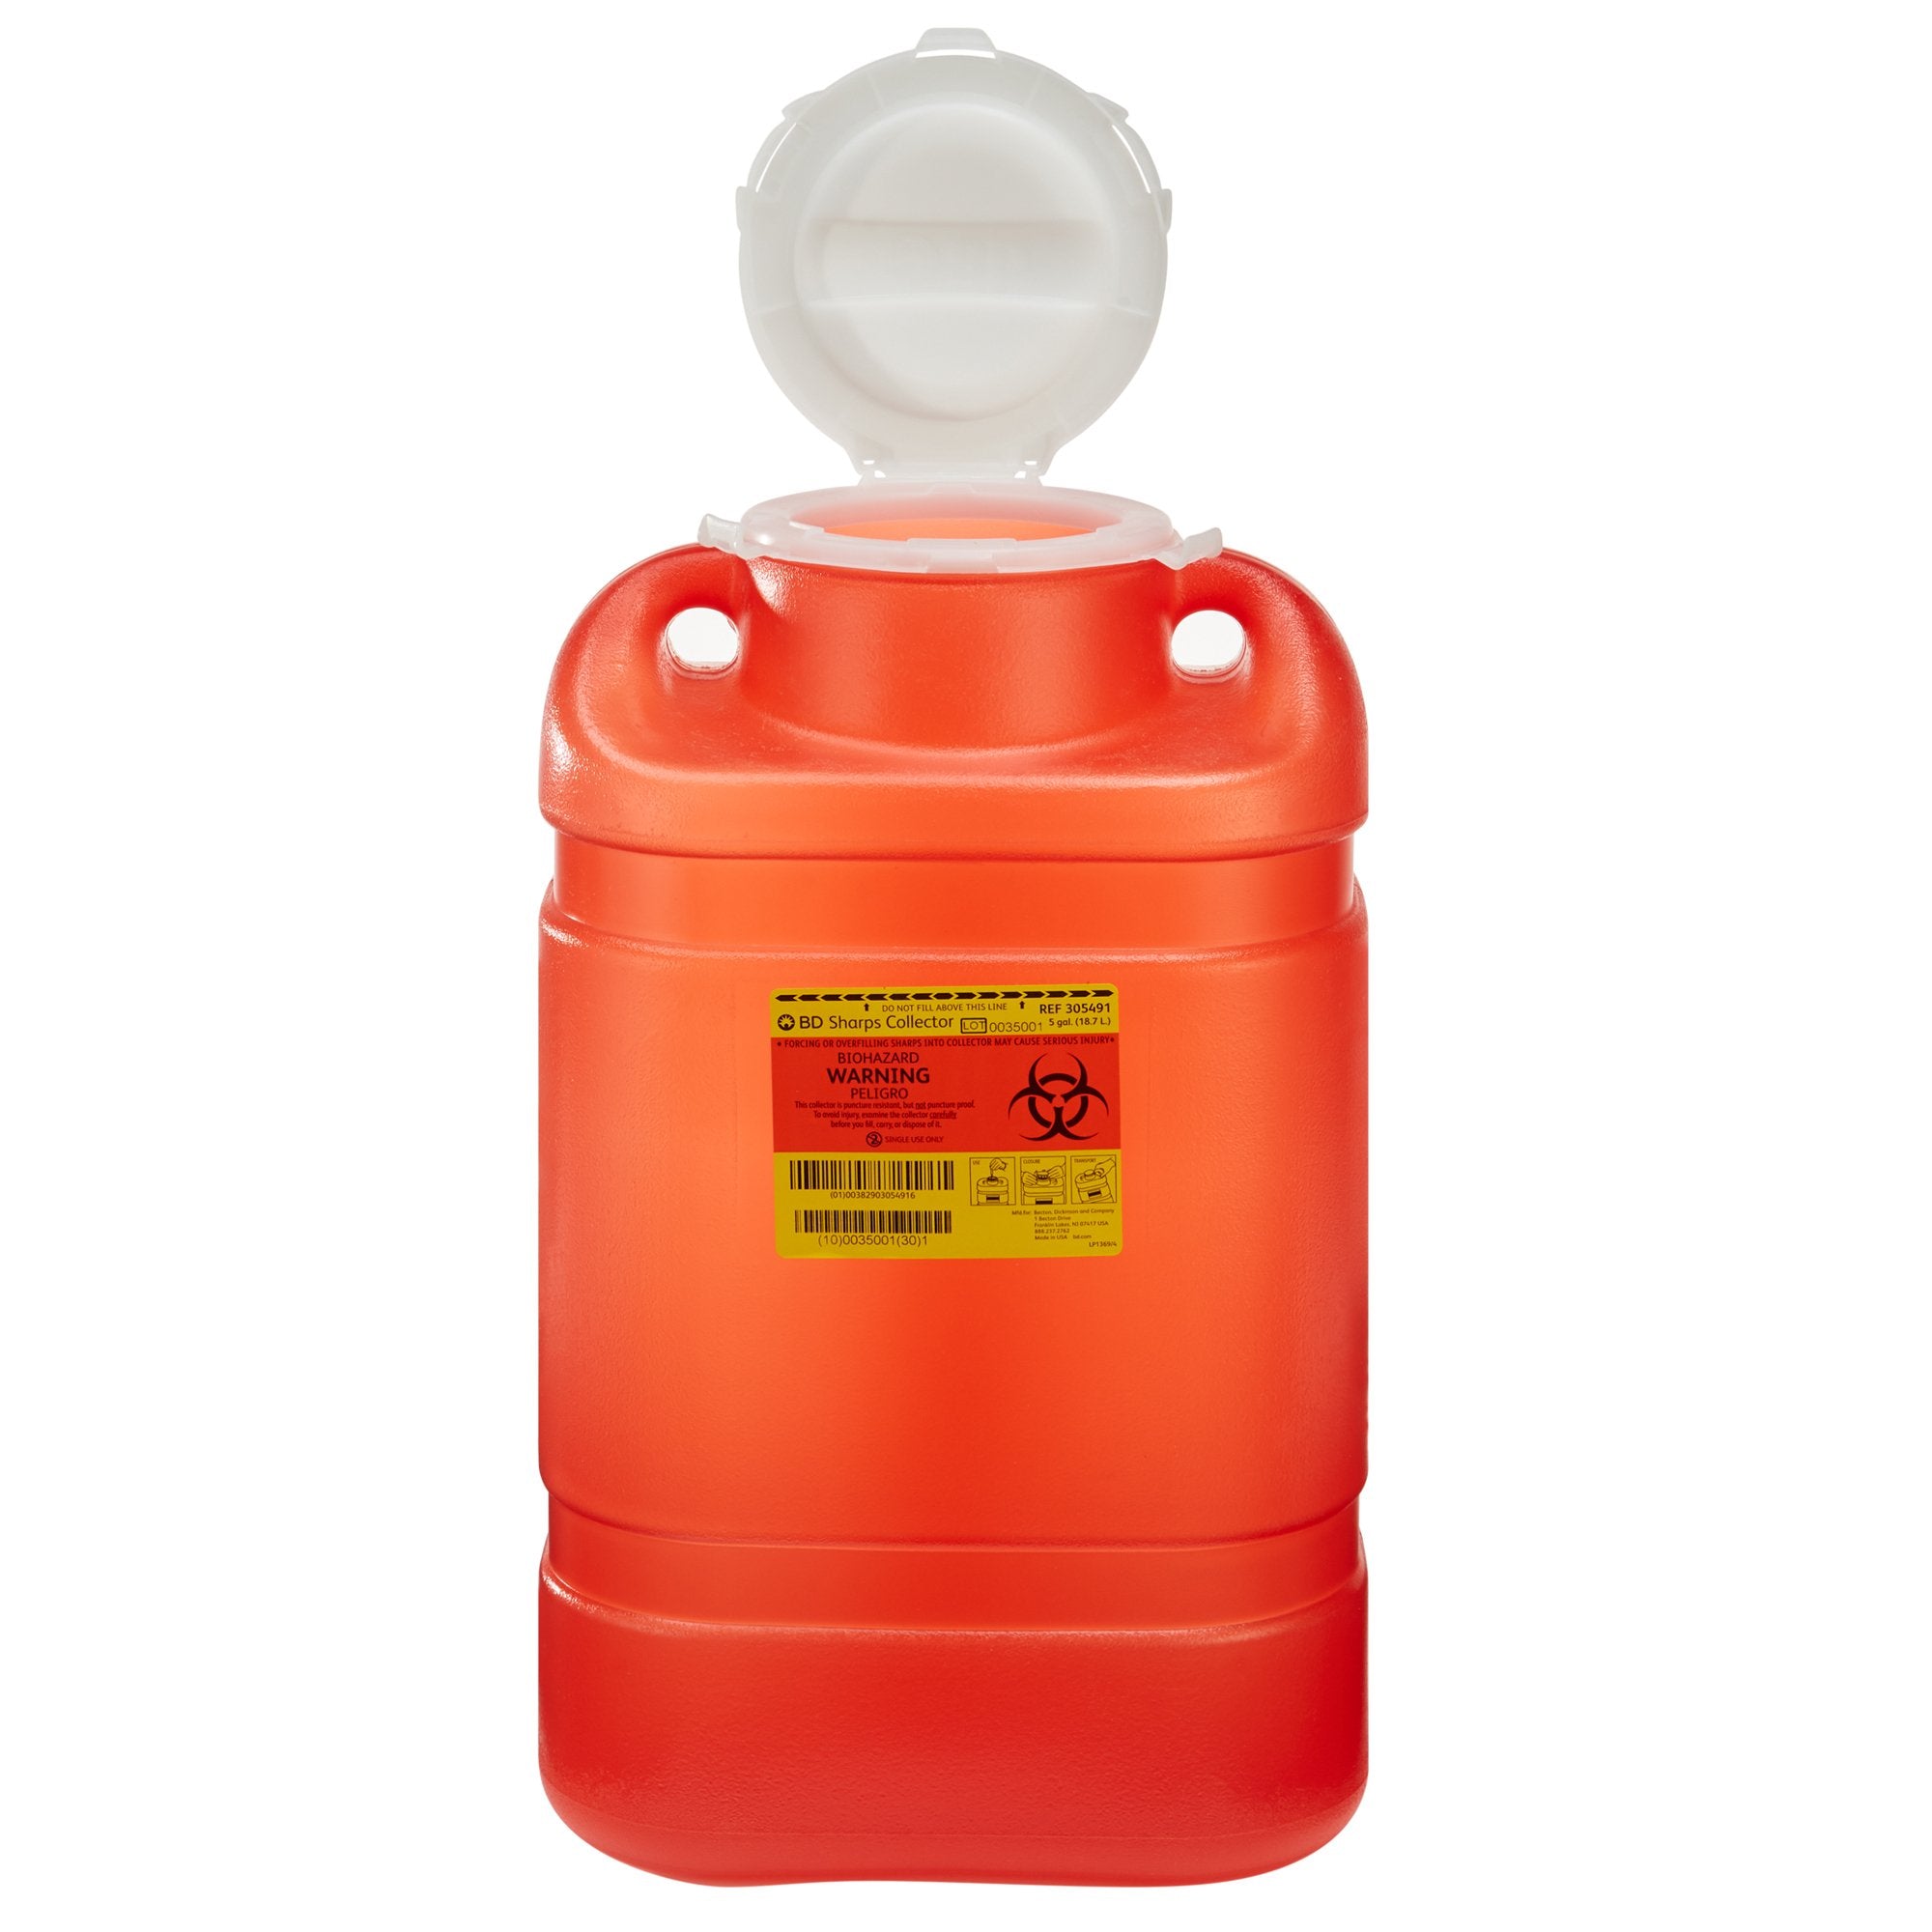 Sharps Container BD™ Red Base 18 H X 7-1/2 W X 10-1/2 D Inch Vertical Entry 5 Gallon